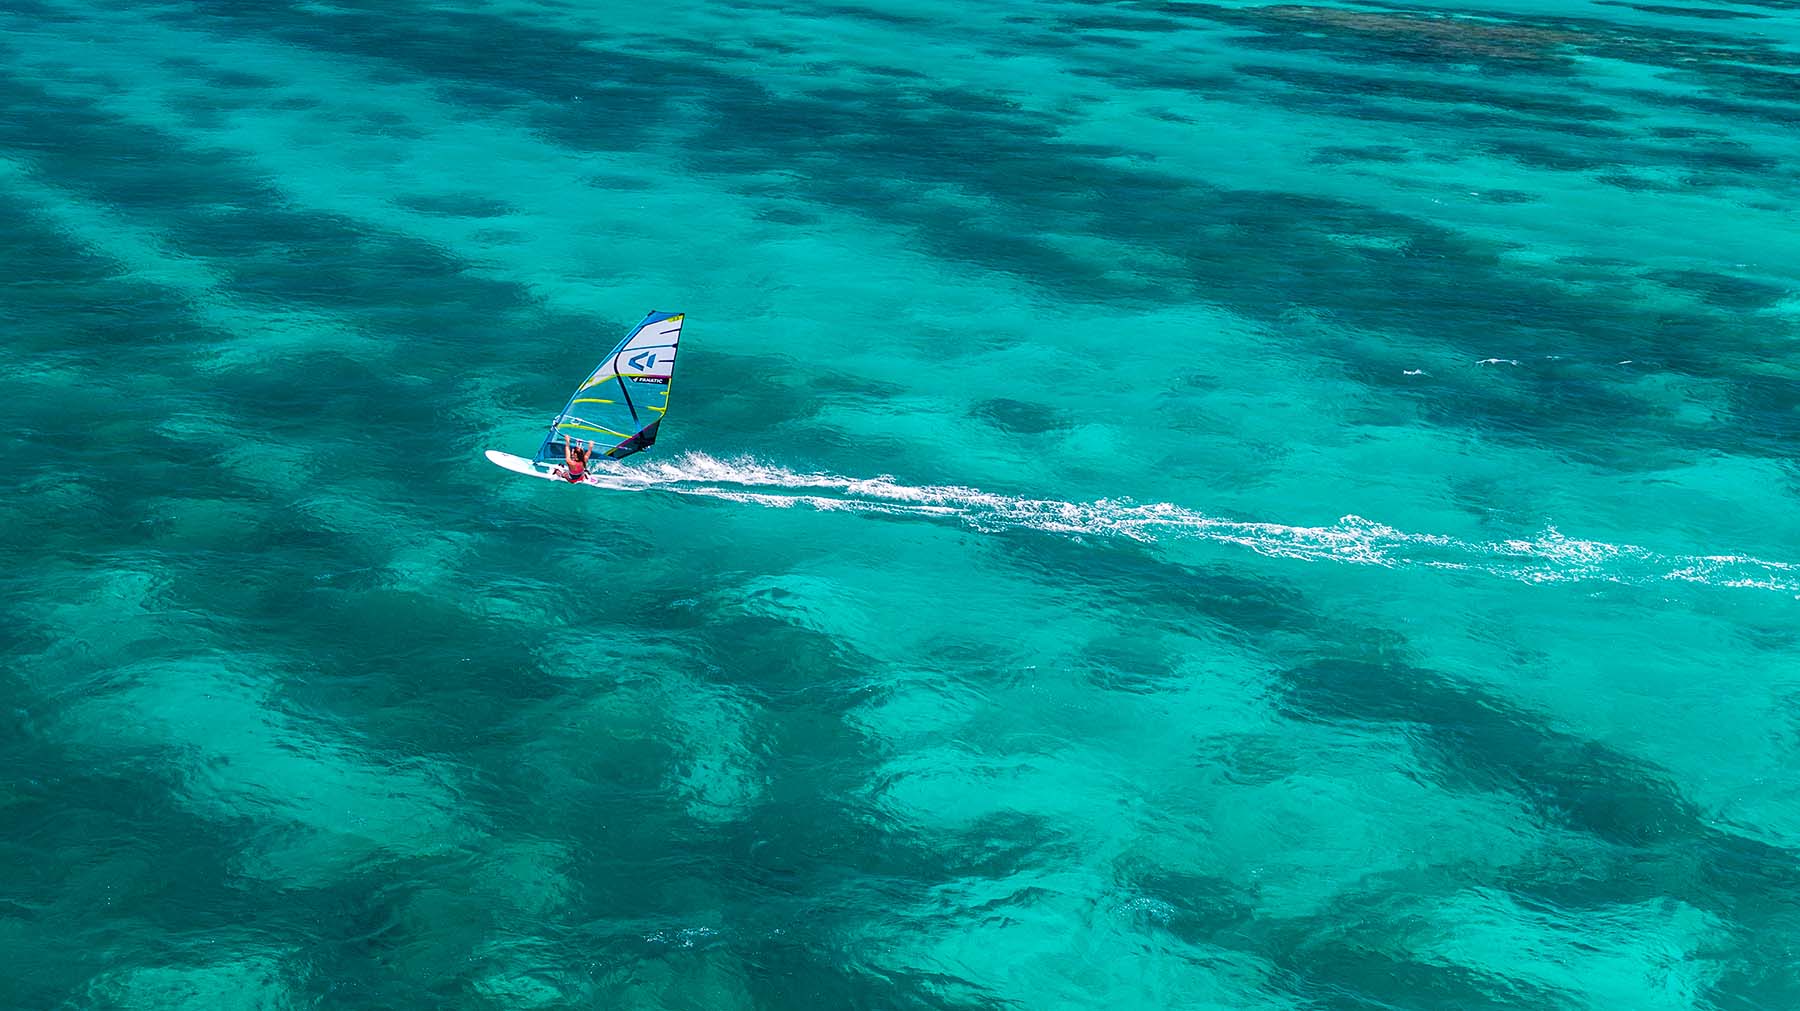 A WINDSURFER ON THE WATER IN MAURITIUS